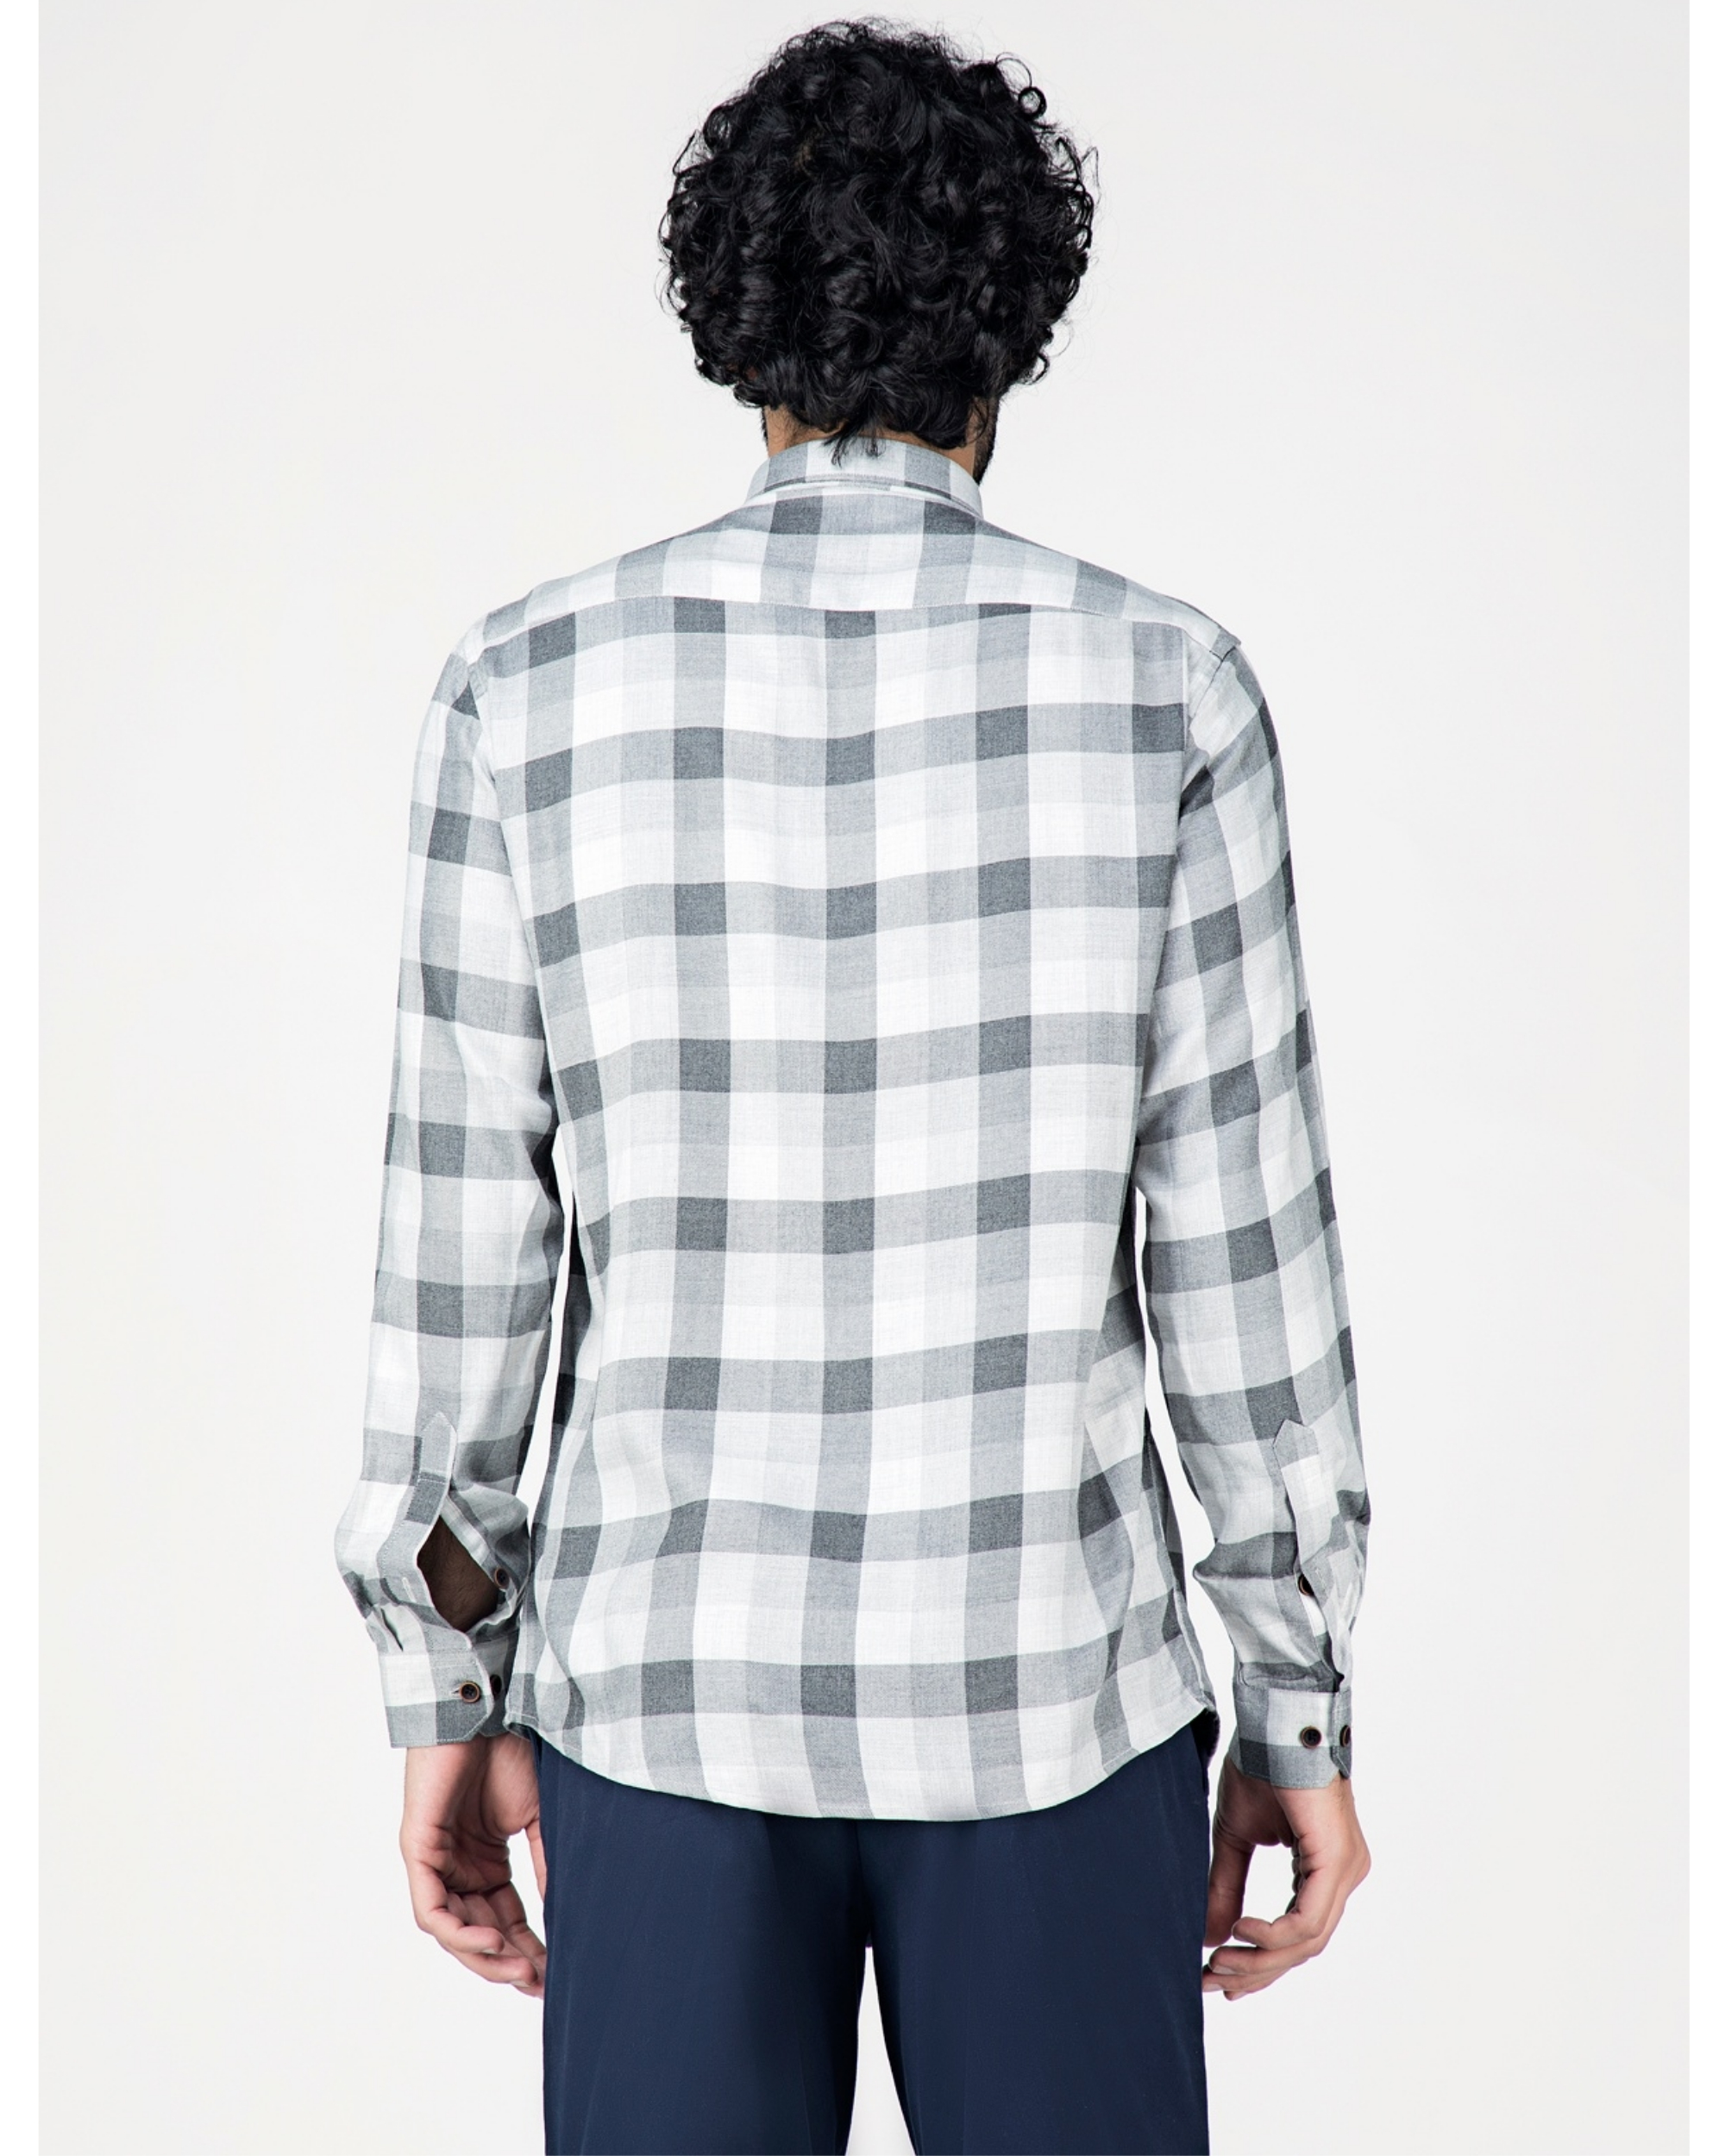 Grey and white gingham checkered shirt by Green Hill | The Secret Label